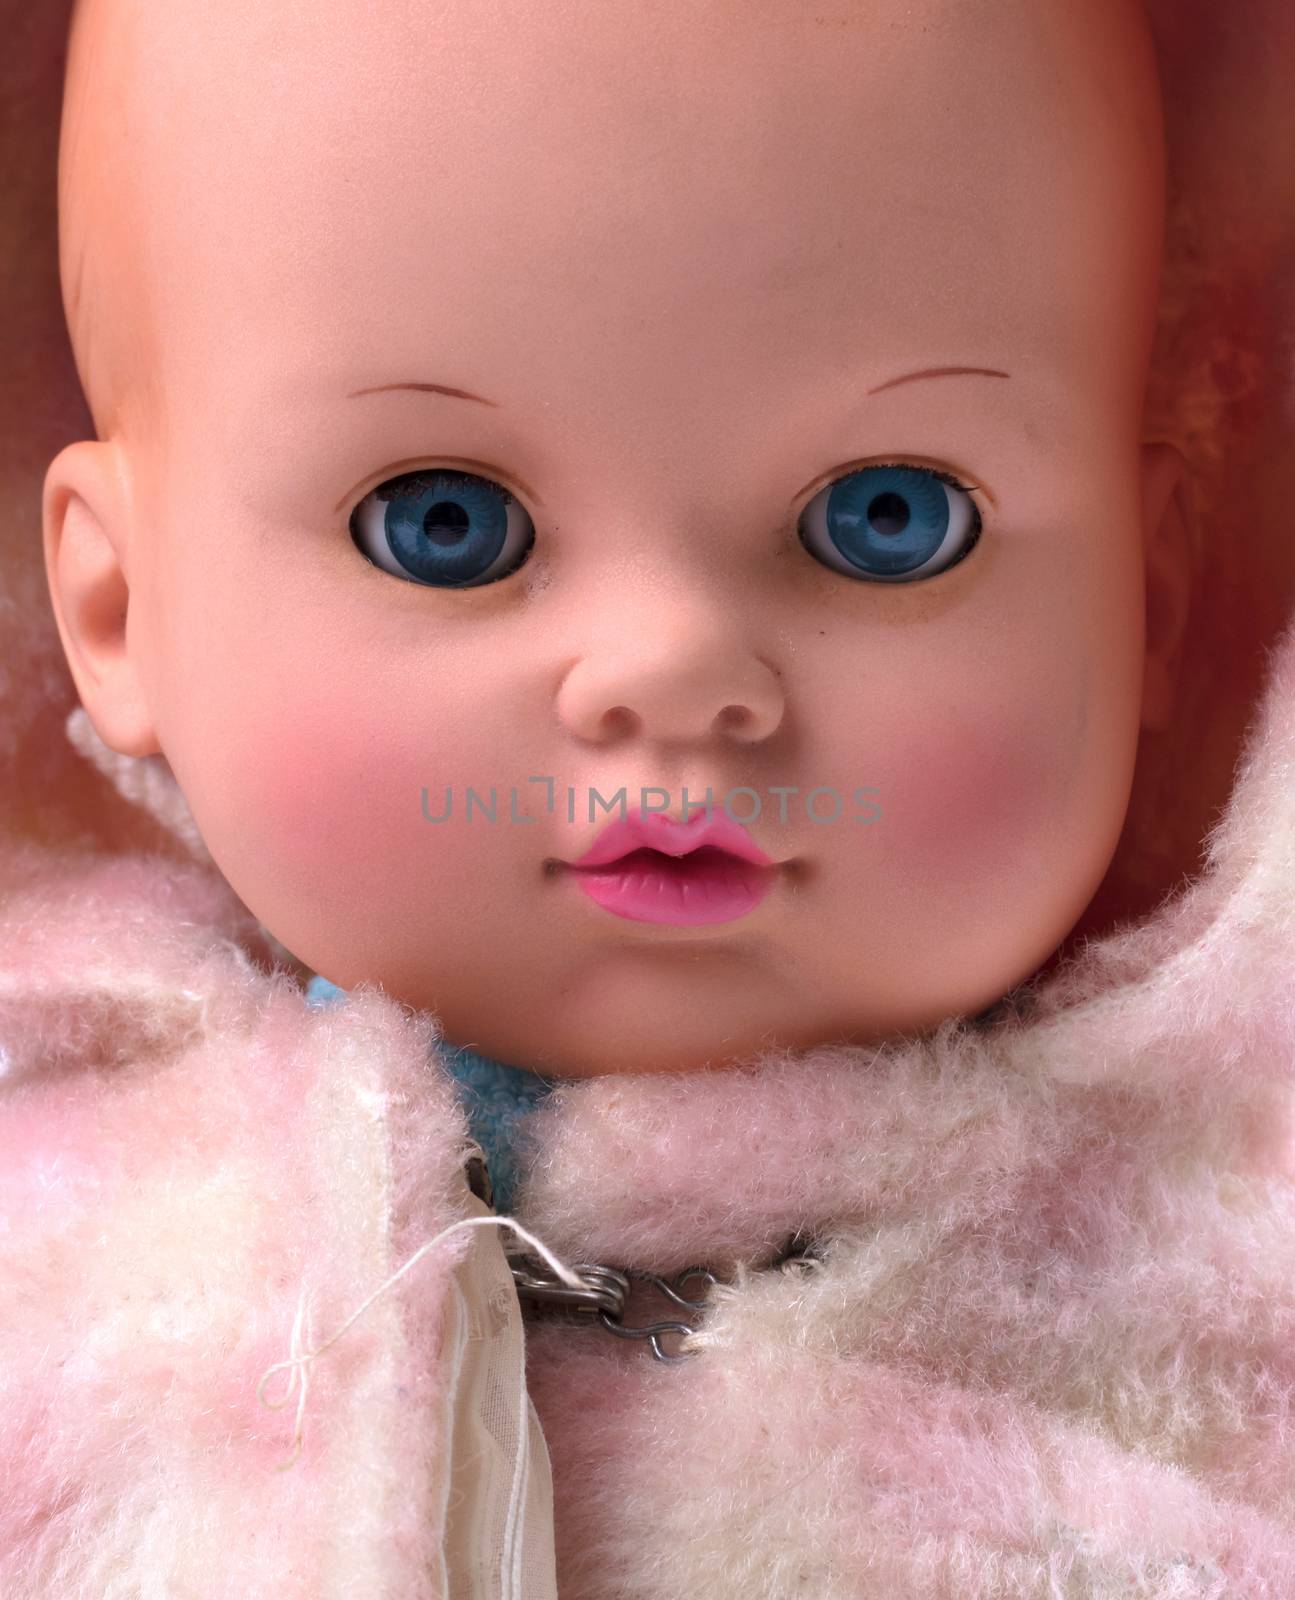 Very old baby doll (1940s) by michaklootwijk